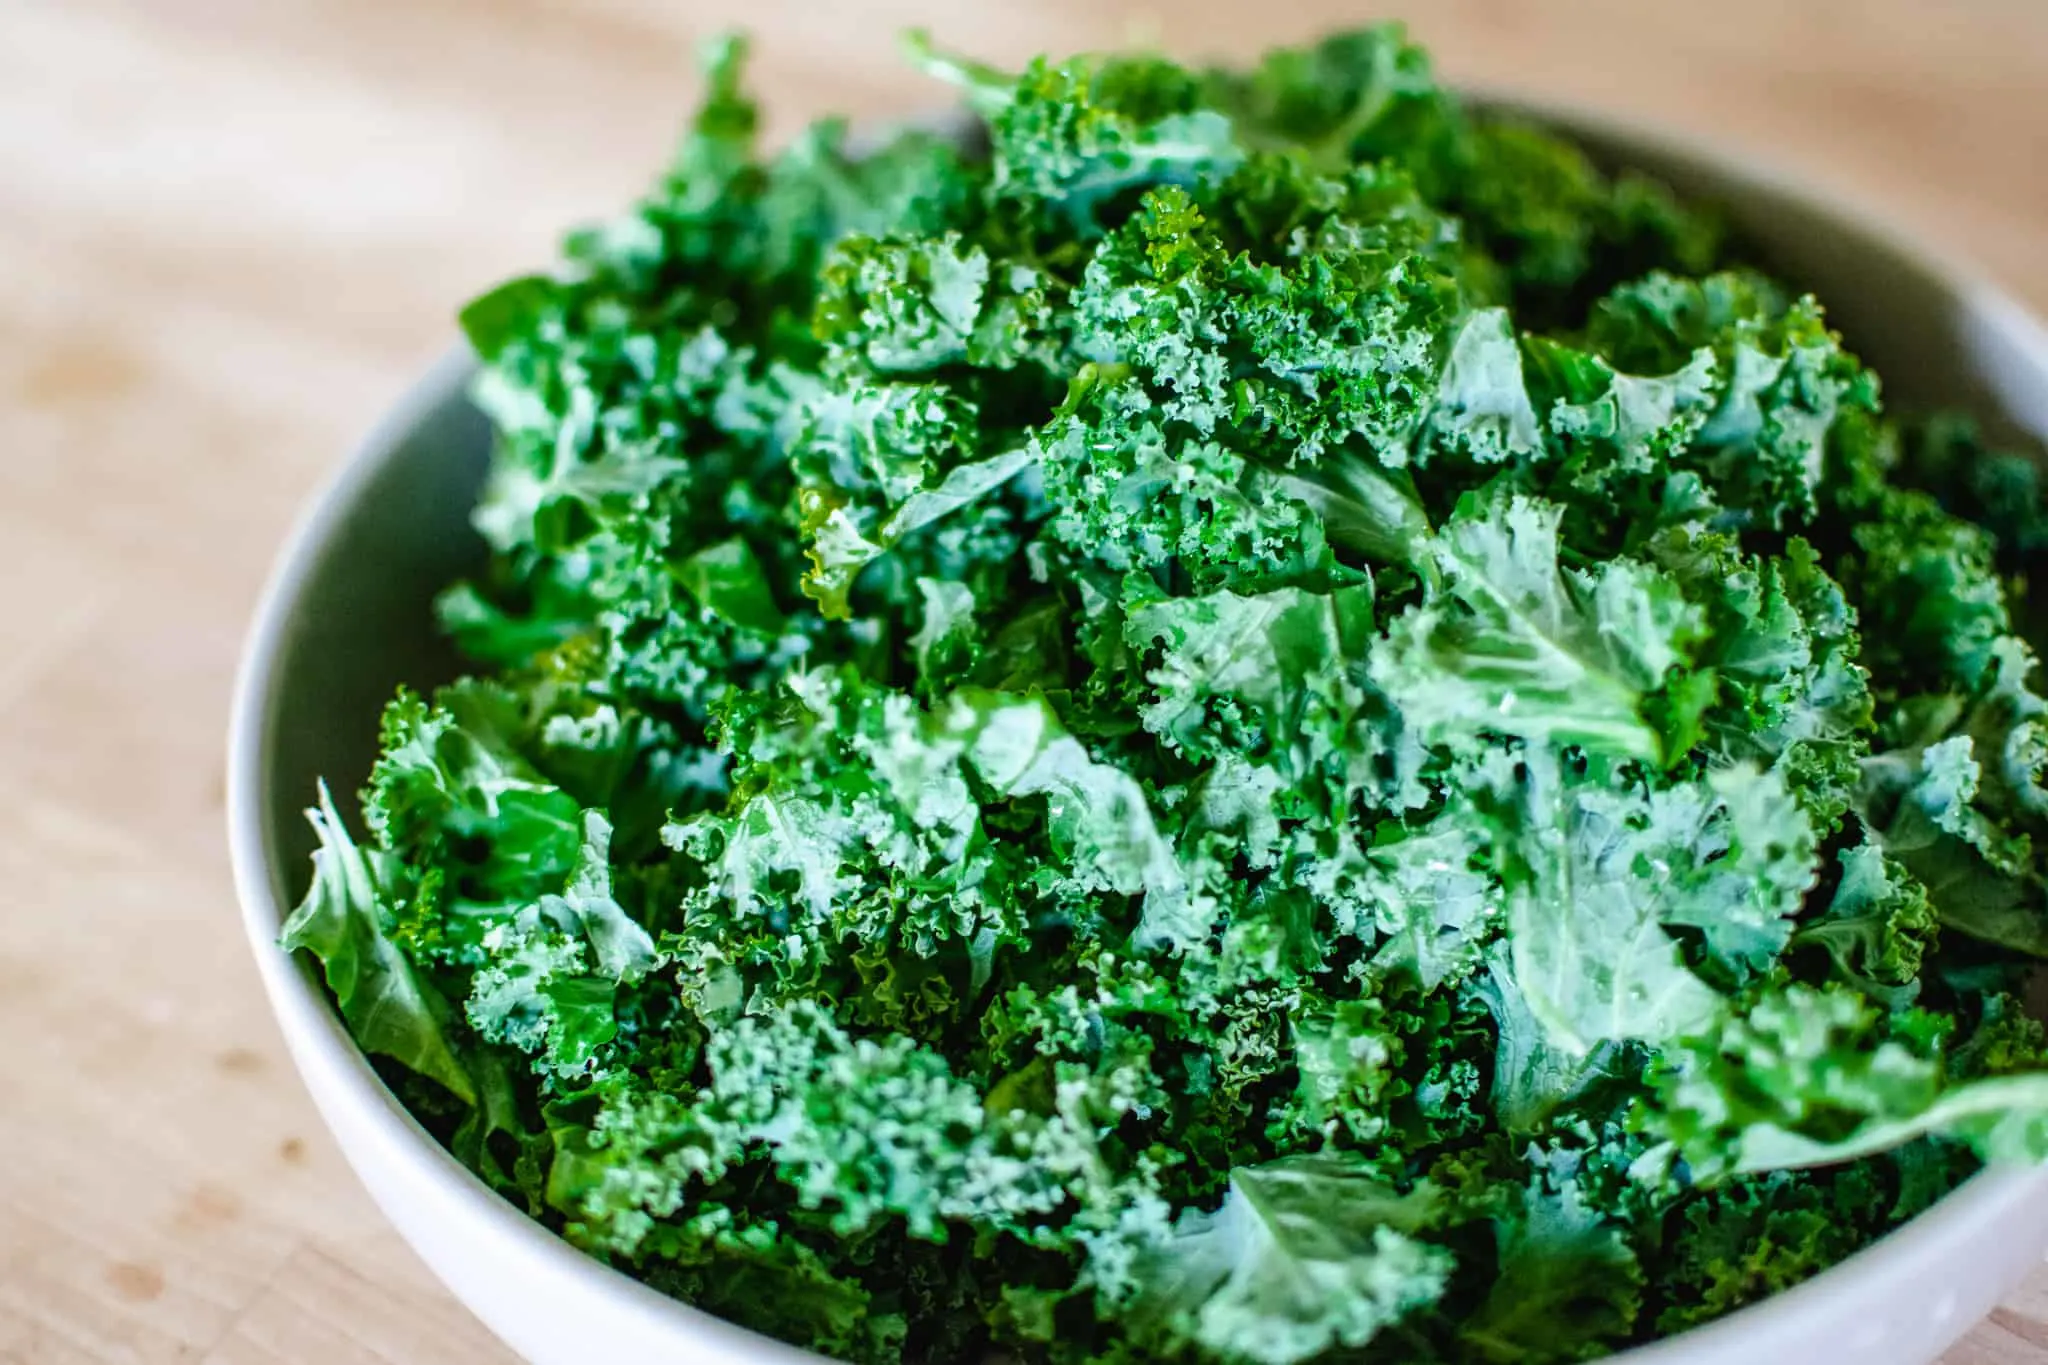 large ceramic bowl filled with chopped, raw kale for cooking into a pasta dish